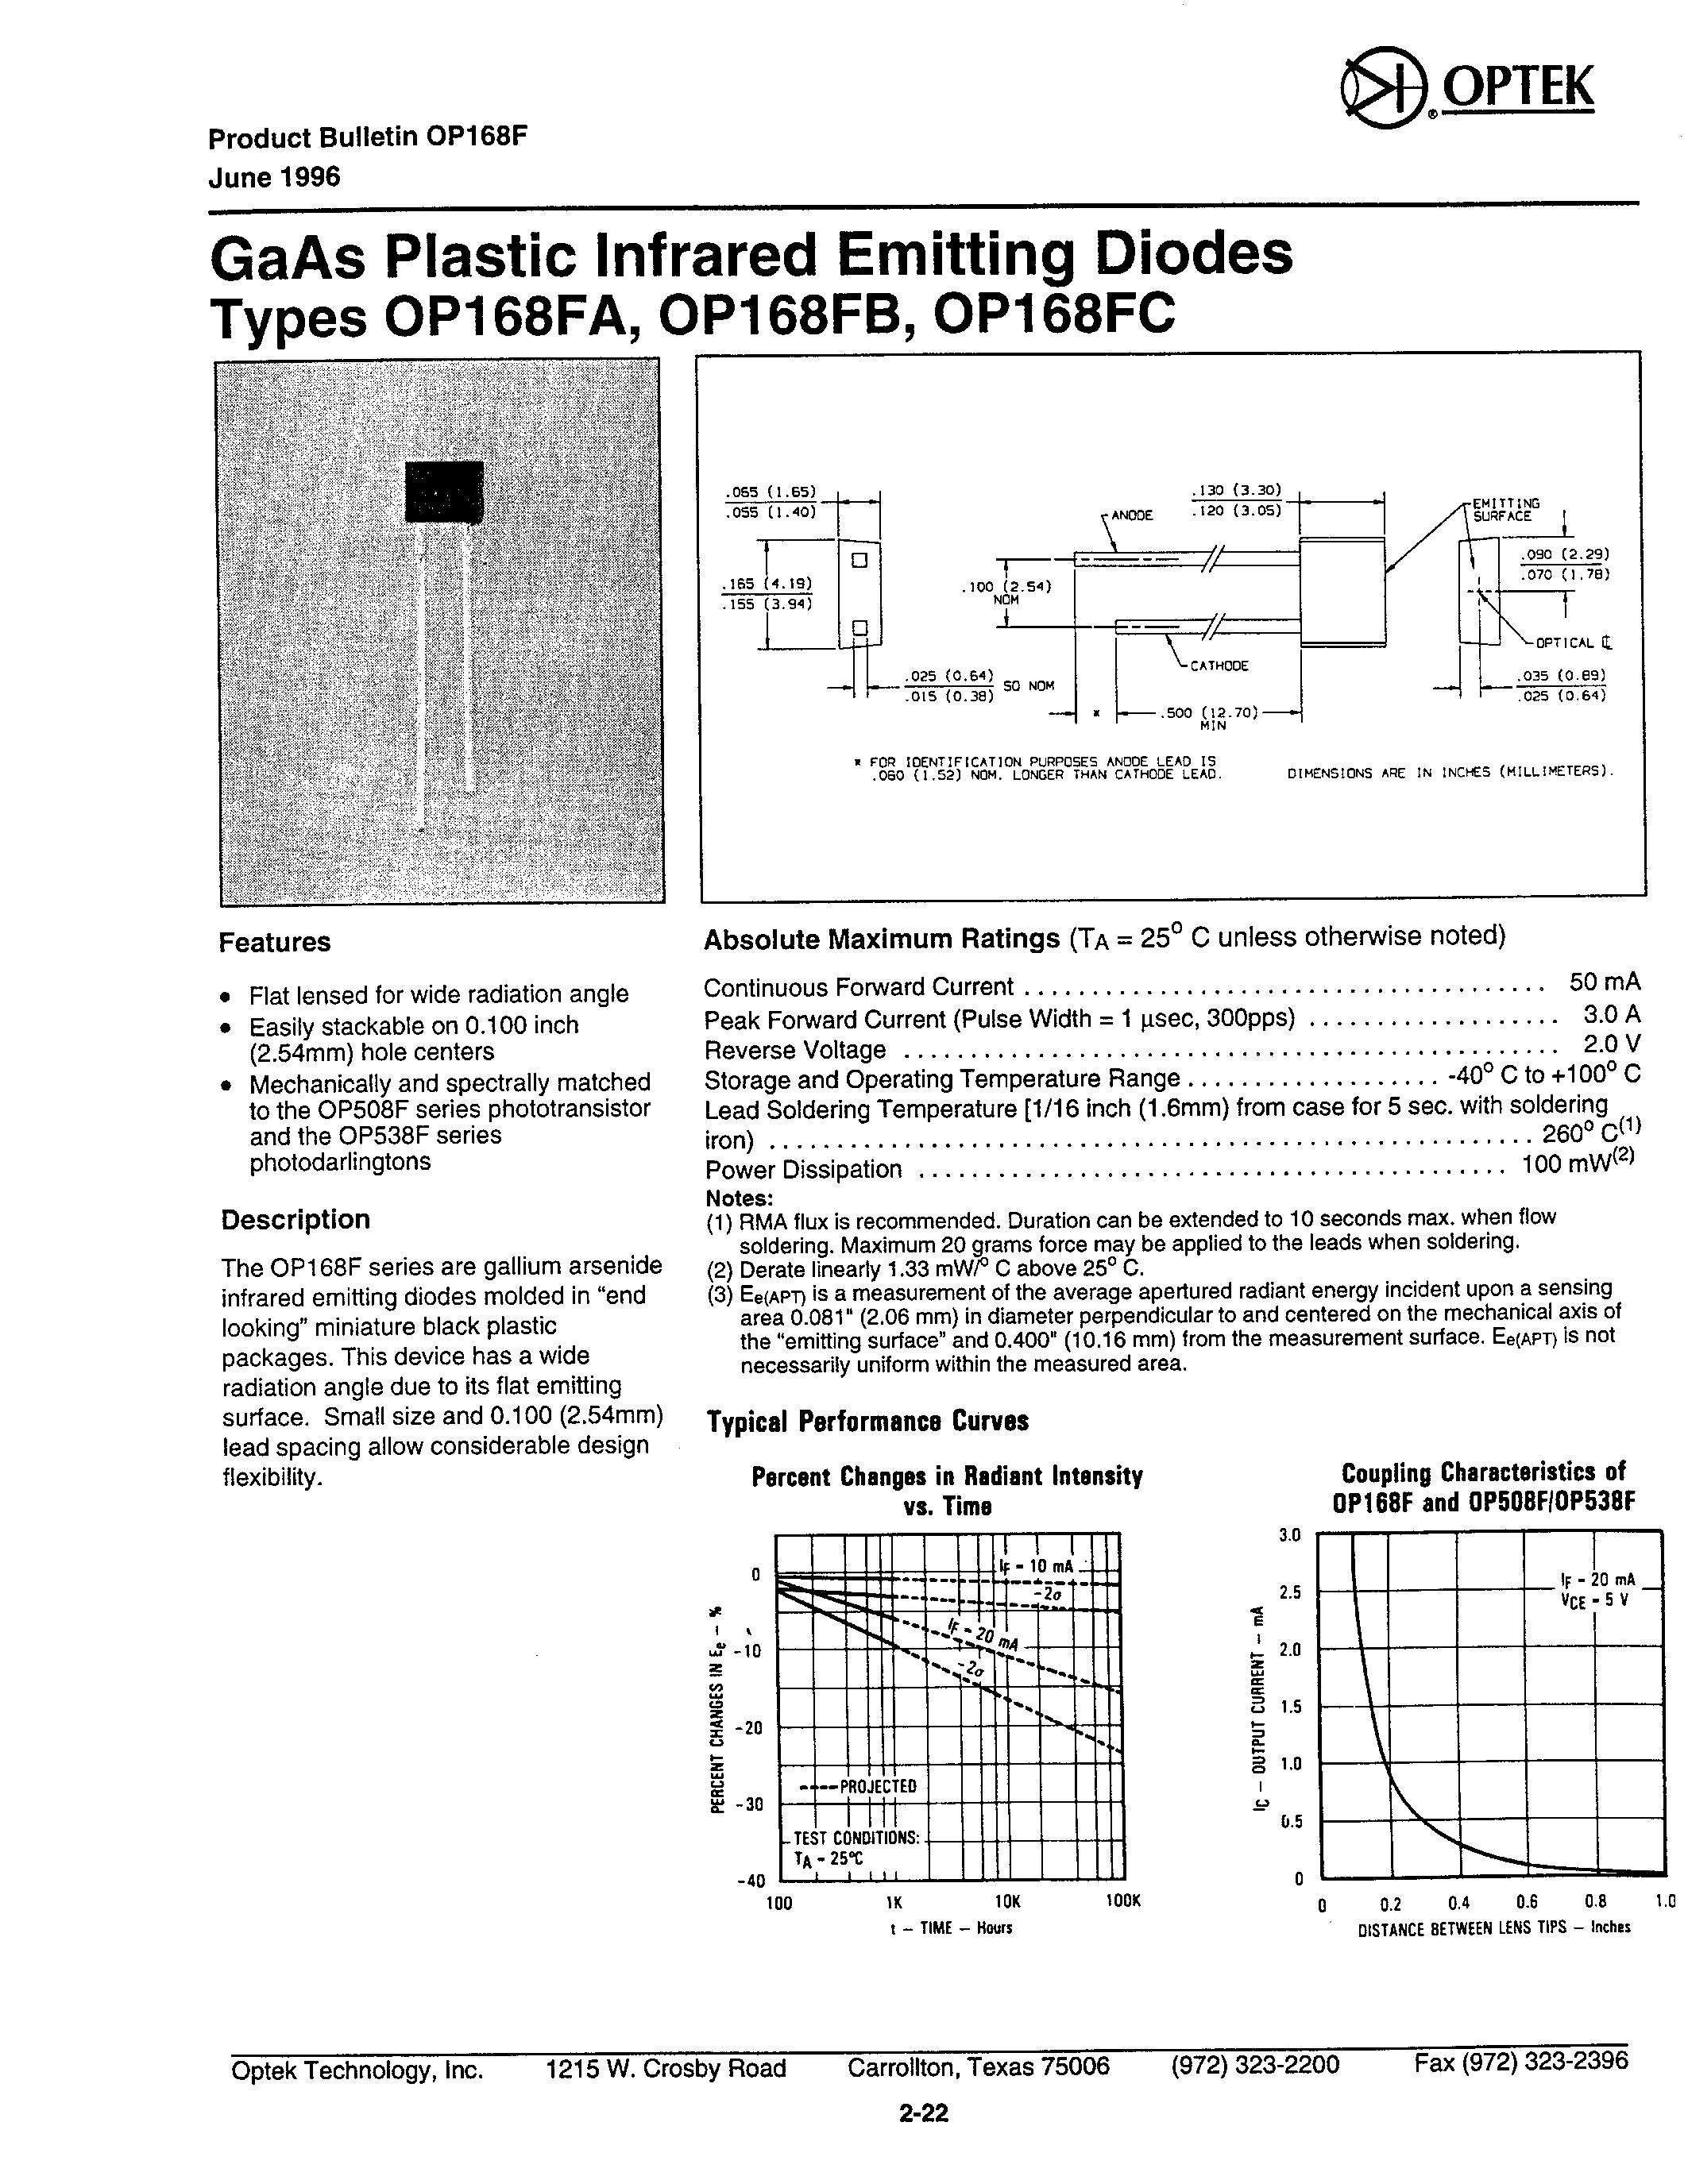 Datasheet OP168FA - GaAs Plastic Infrared Emitting Diodes page 1